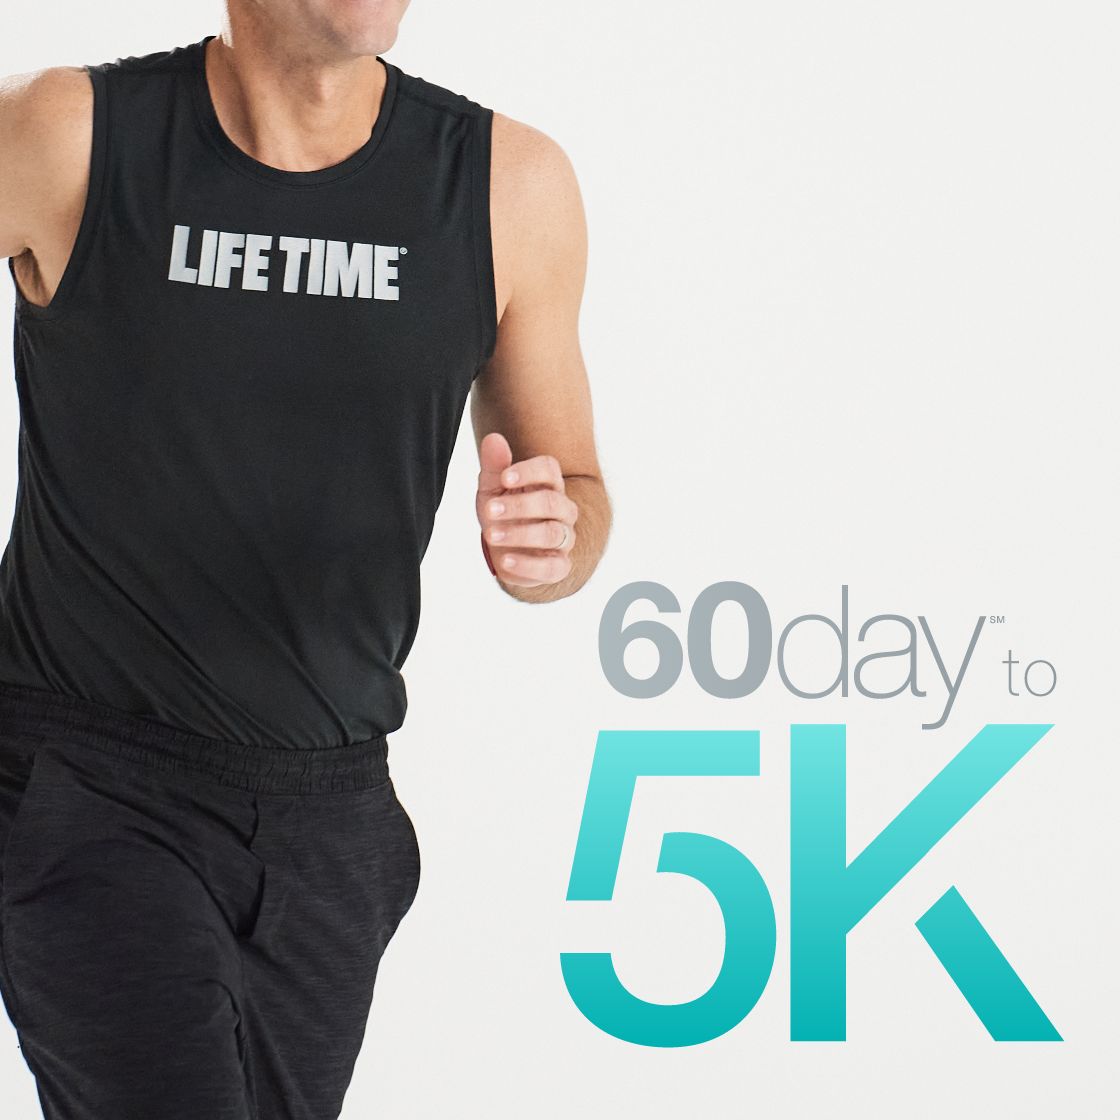 Imageof a man running with words “60day to 5K” on image. 